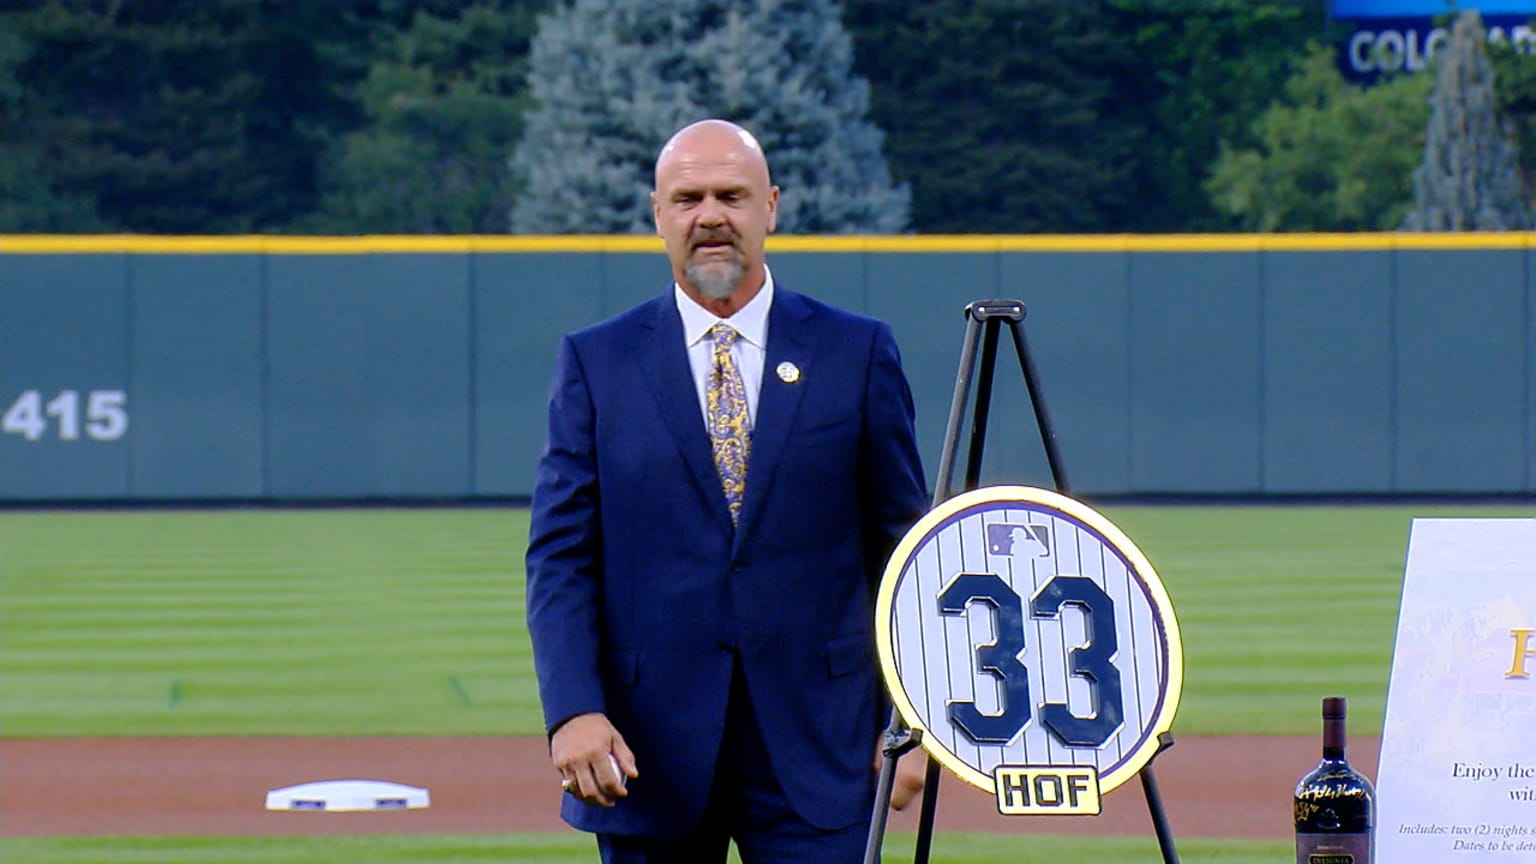 Larry Walker - Retired - Retired and enjoying time to pursue